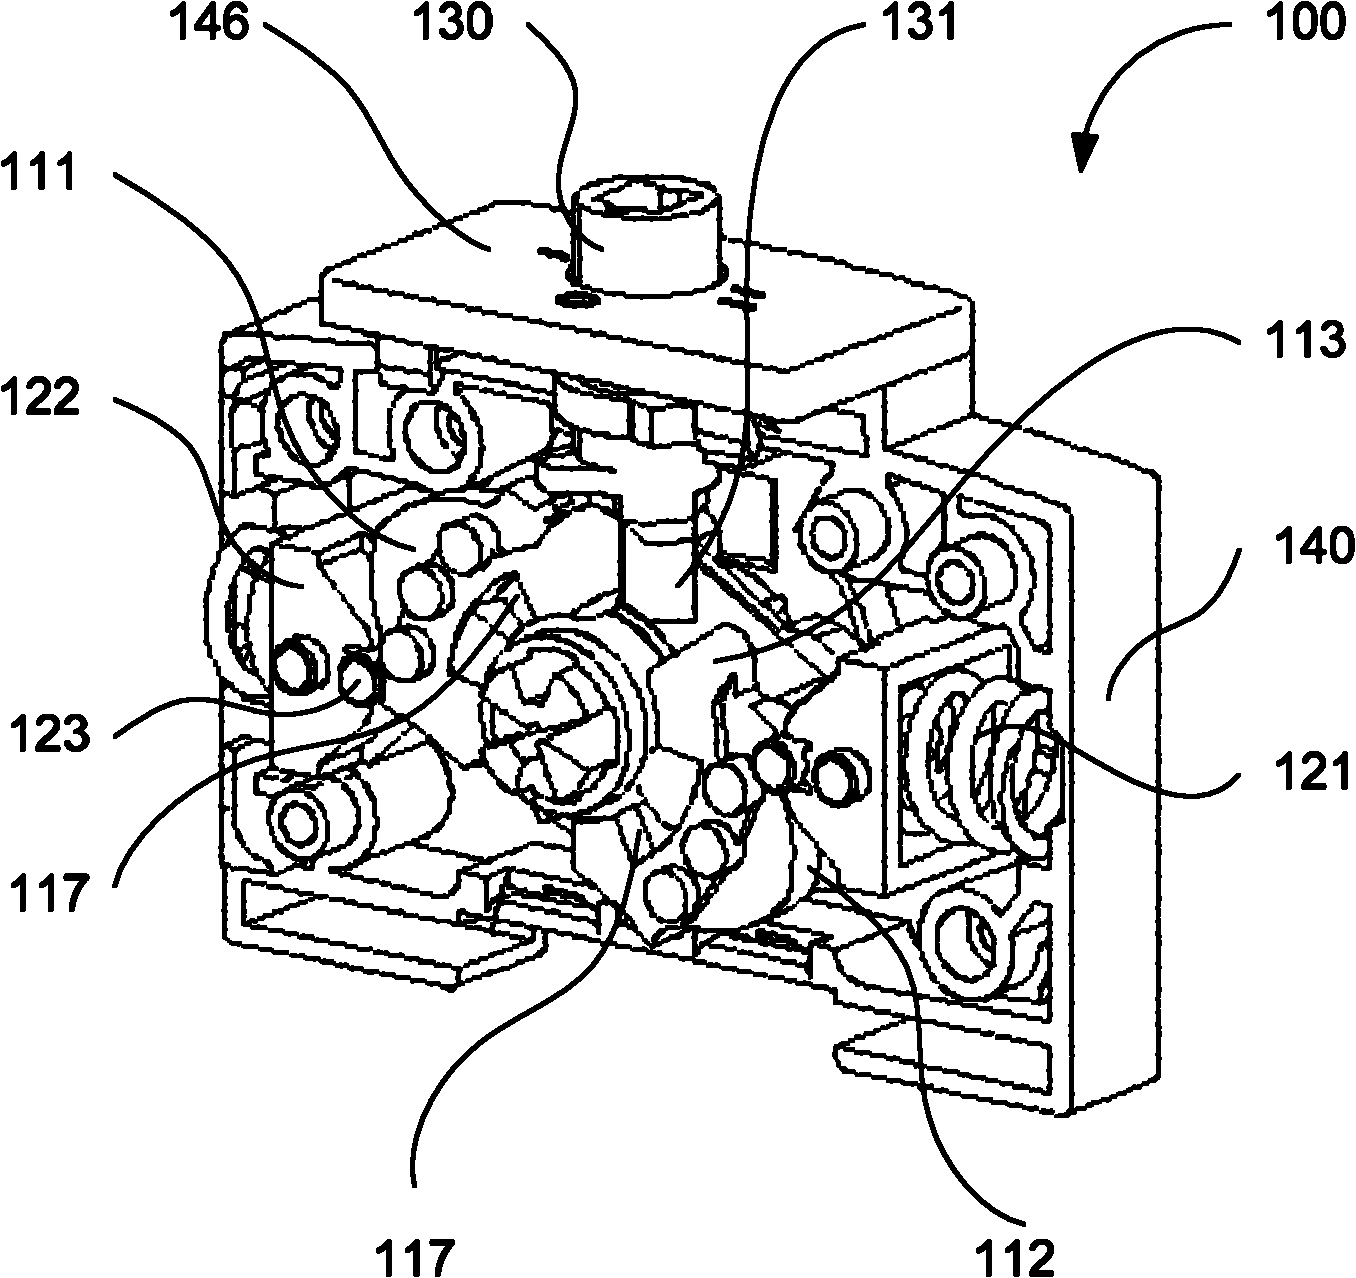 Switch operating device